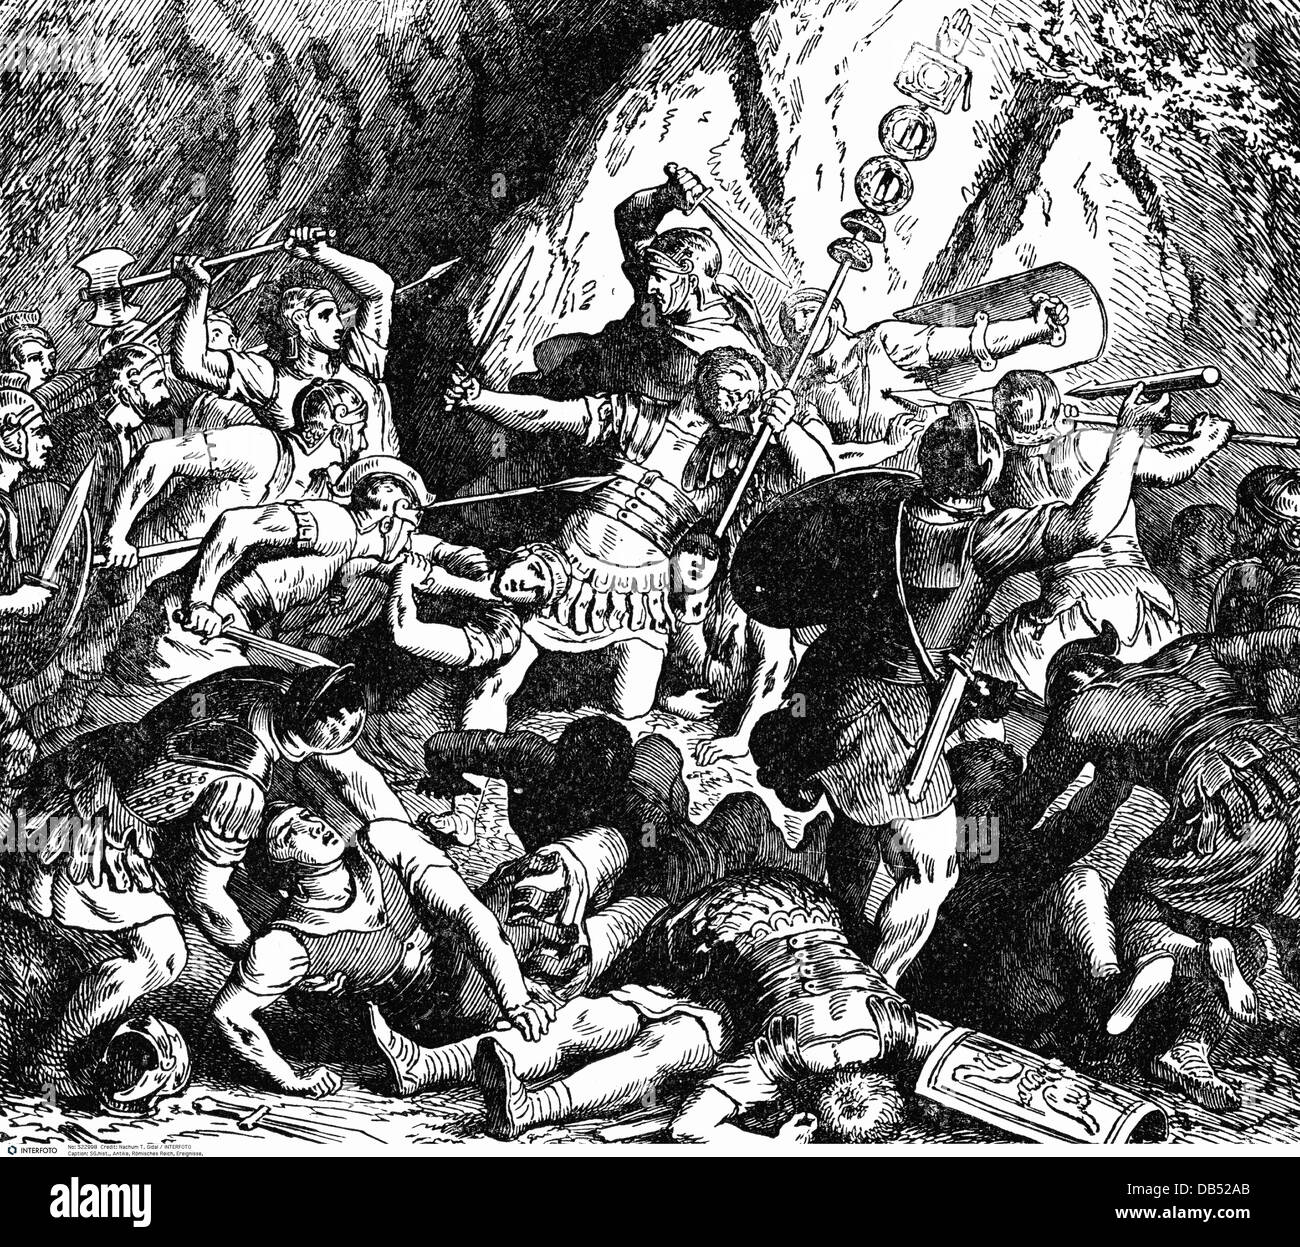 ancient world, Roman Empire, downfall of the gens Fabia, 477 BC, history painting, wood engraving, 19th century, Roman, Romans, patrician, patricians, legend, Roman legends, war against Veji, Etruscan, Etruscans, Fabius, massacres, standard, guidon, battle, battles, battlefield, battle field, battleground, battle fields, bloodbath, carnage, slaughter, massacre, ancient world, ancient times, historic, historical, ancient world, people, Additional-Rights-Clearences-Not Available Stock Photo